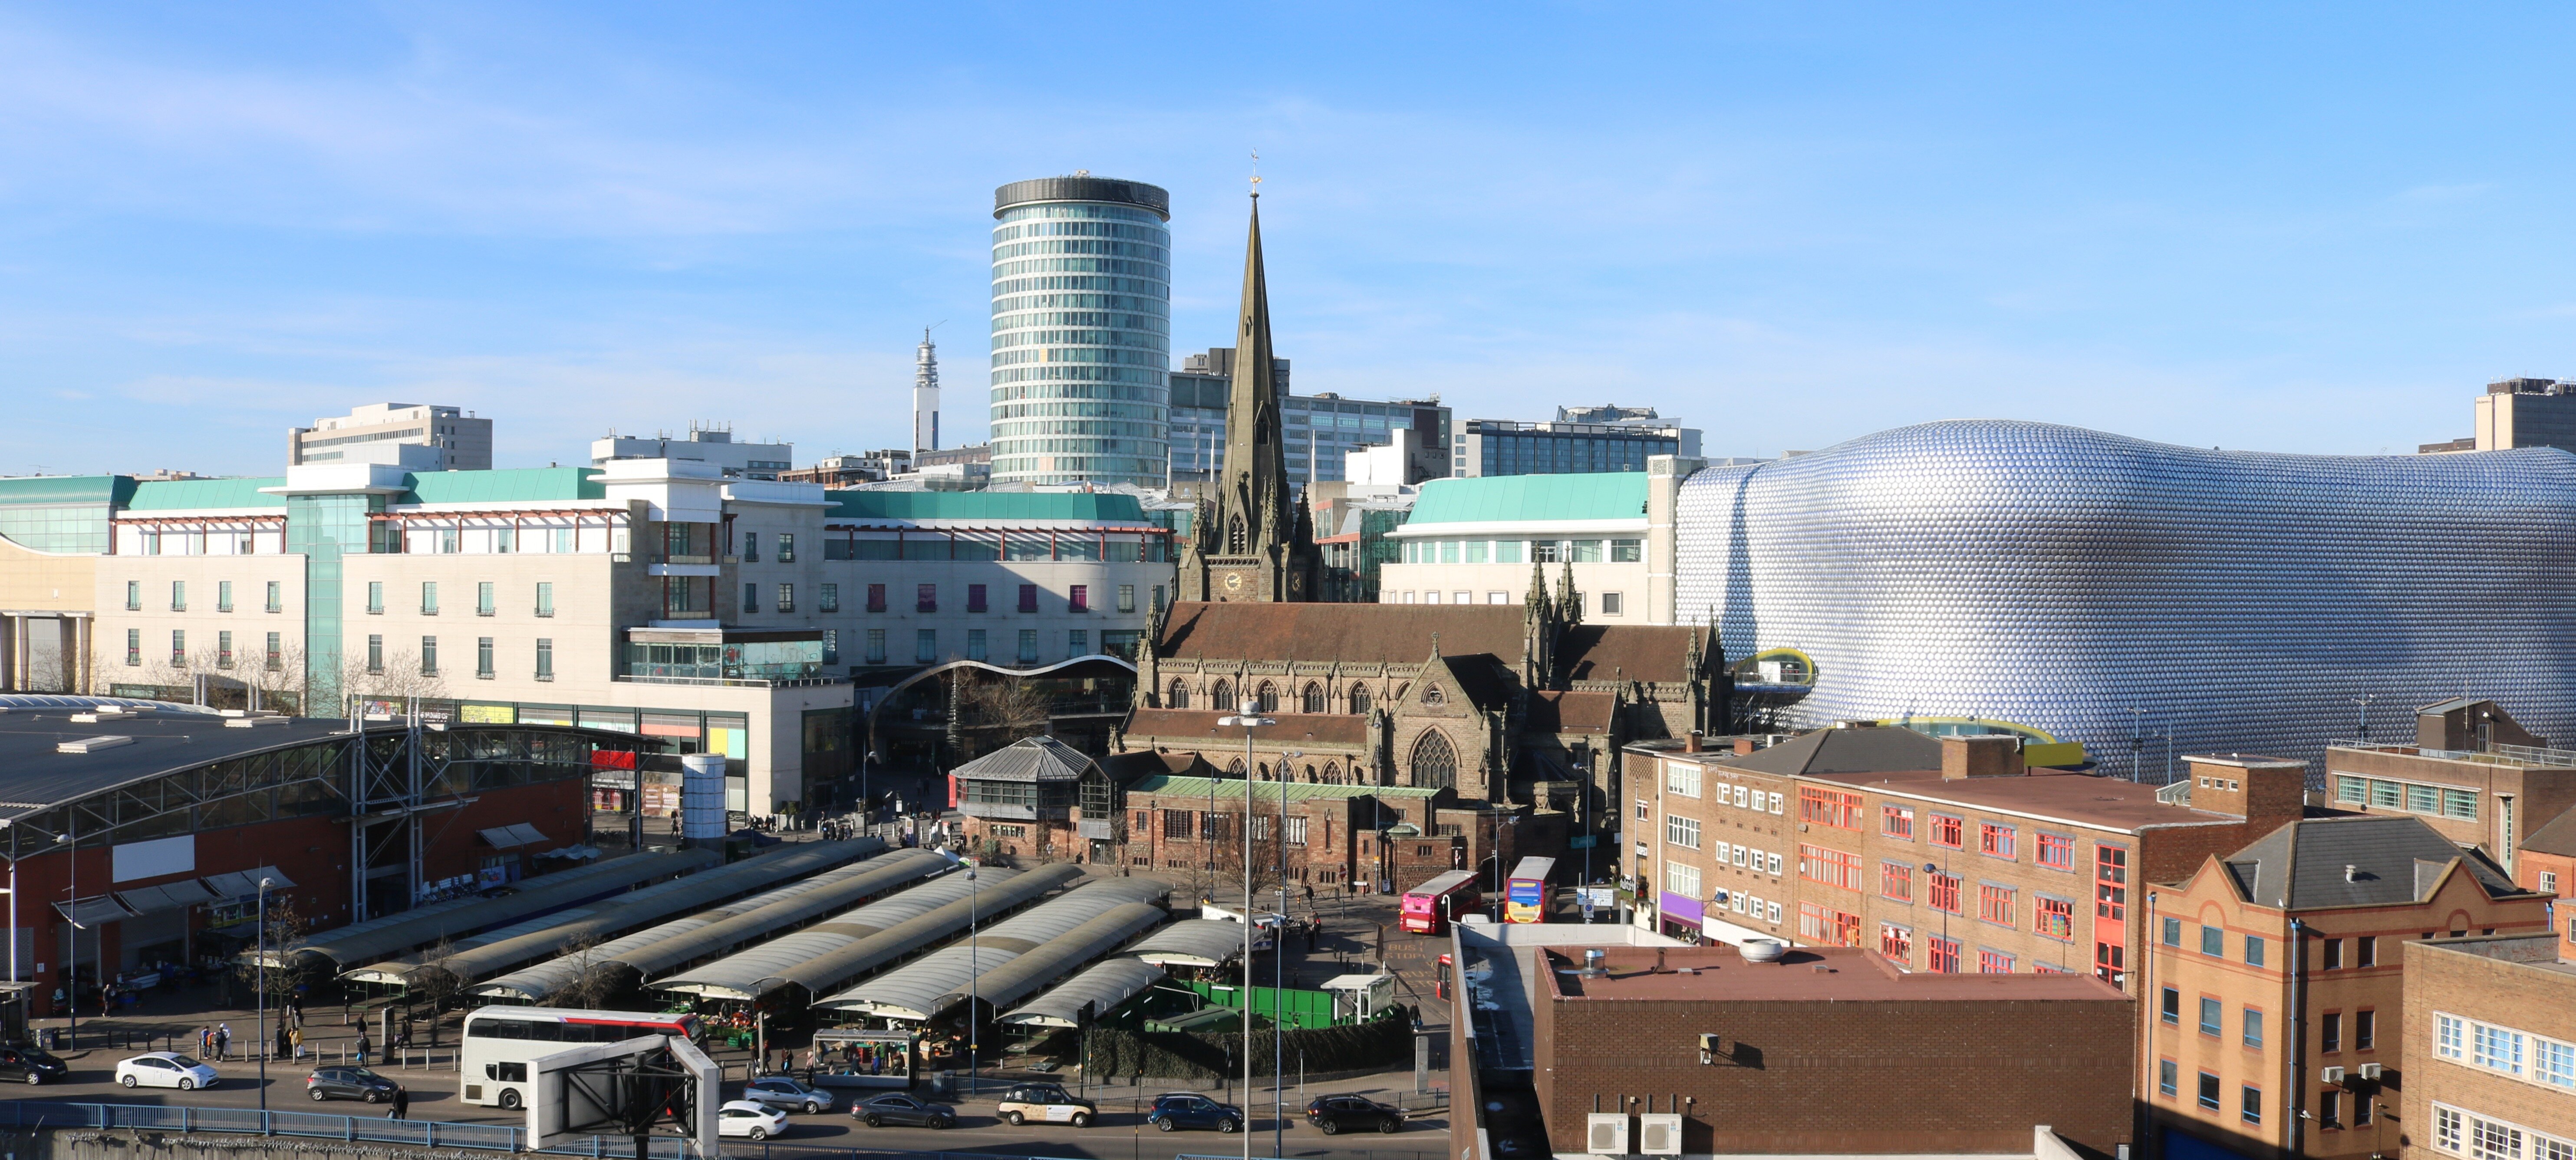 Birmingham council granted new enforcement powers as restrictions on hospitality increase